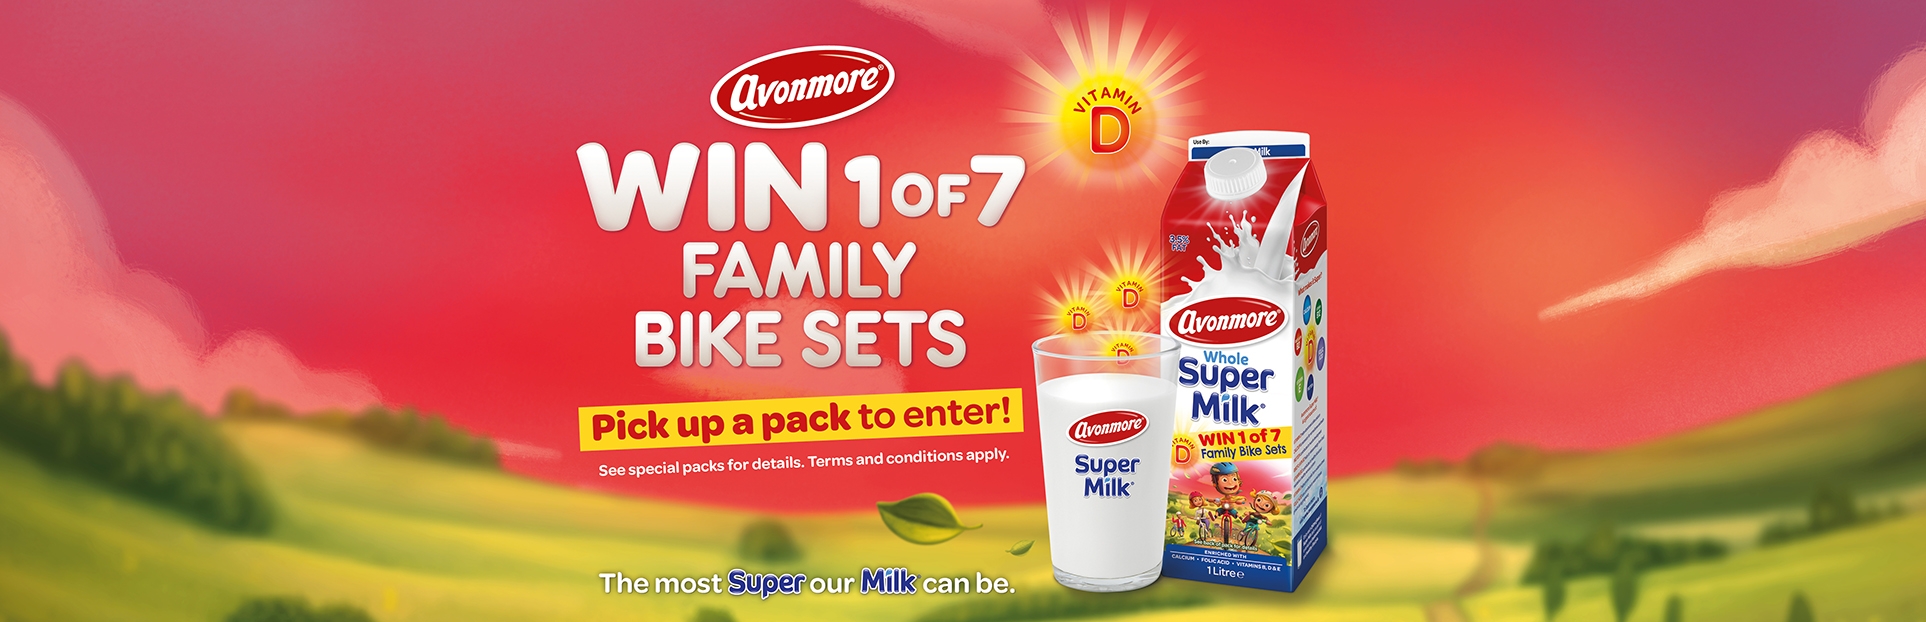 Win a Family Bike Set with Avonmore Super Milk. 7 prizes to be won! 